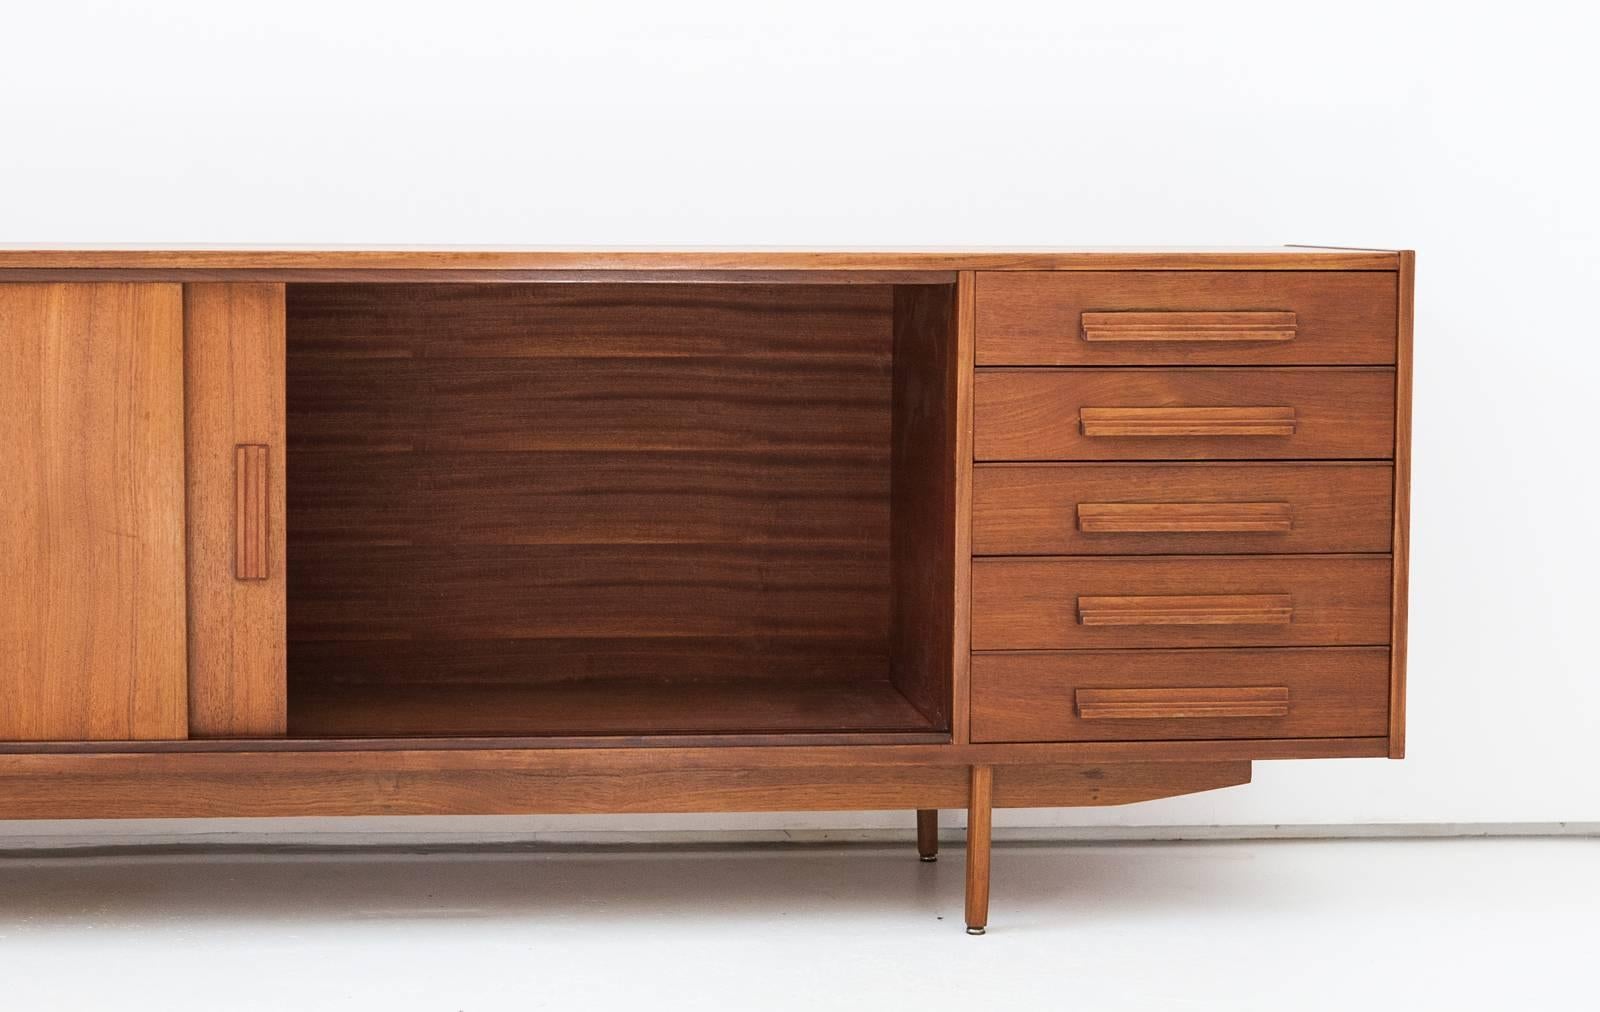 Mid-Century Modern teak sideboard manufactured in the 1950s
Two sliding doors and five drawers
Completely restored